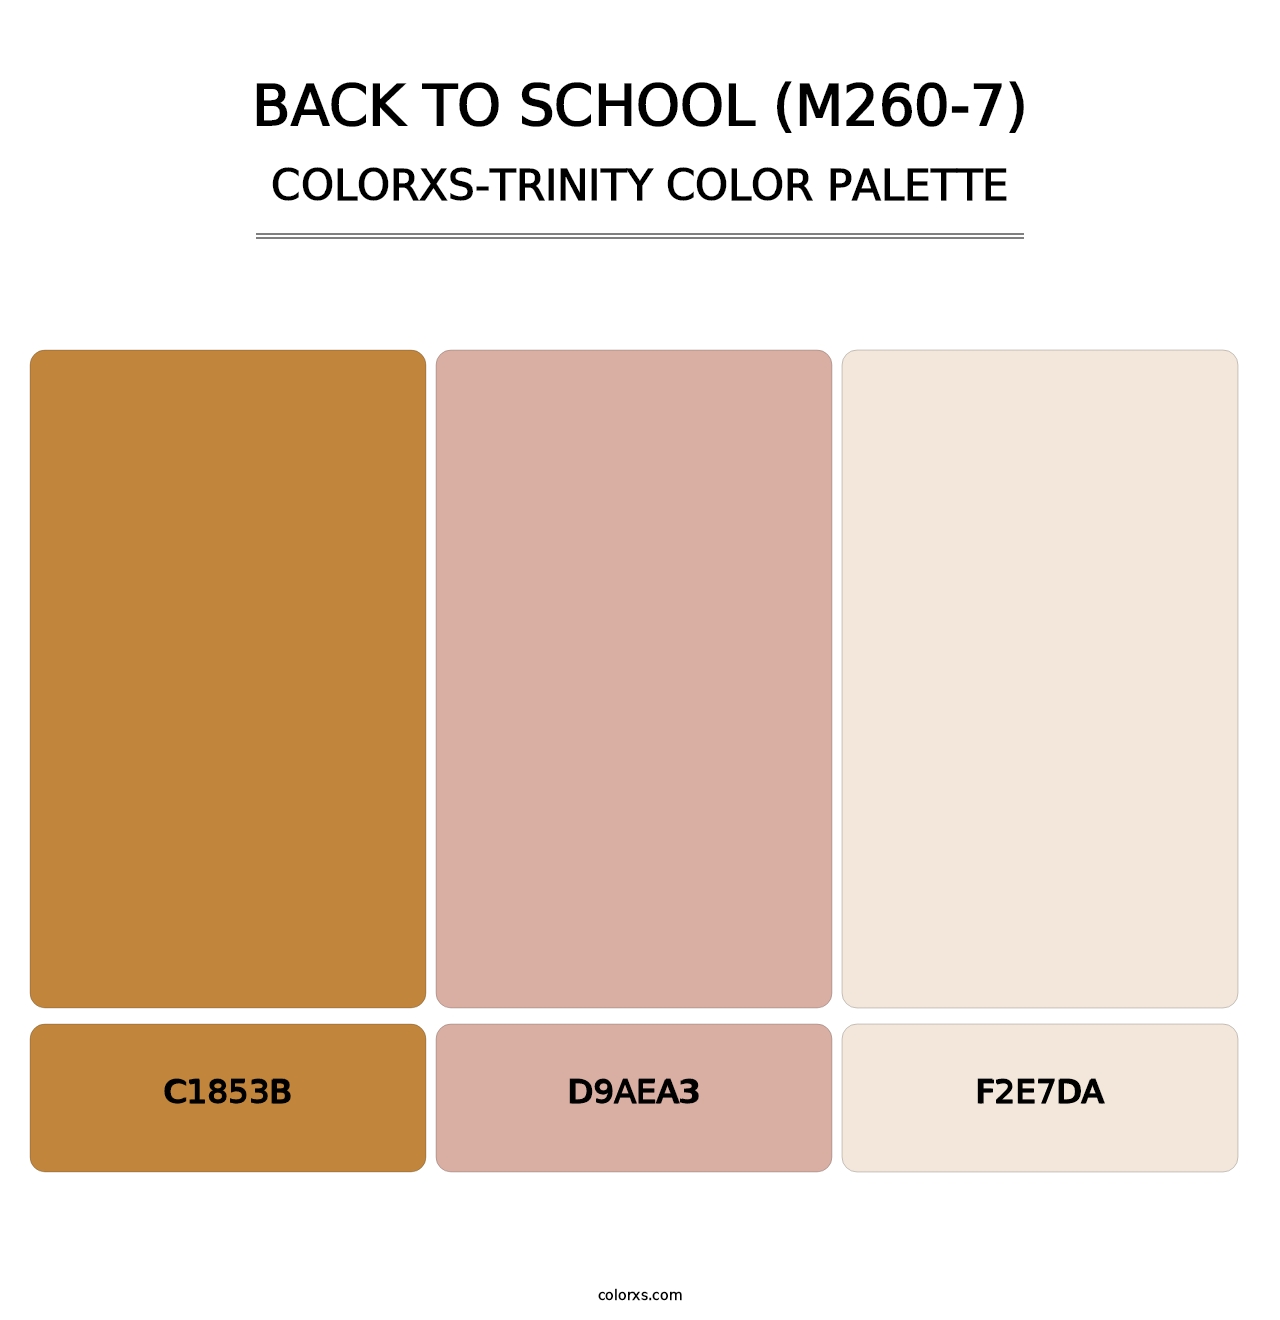 Back To School (M260-7) - Colorxs Trinity Palette